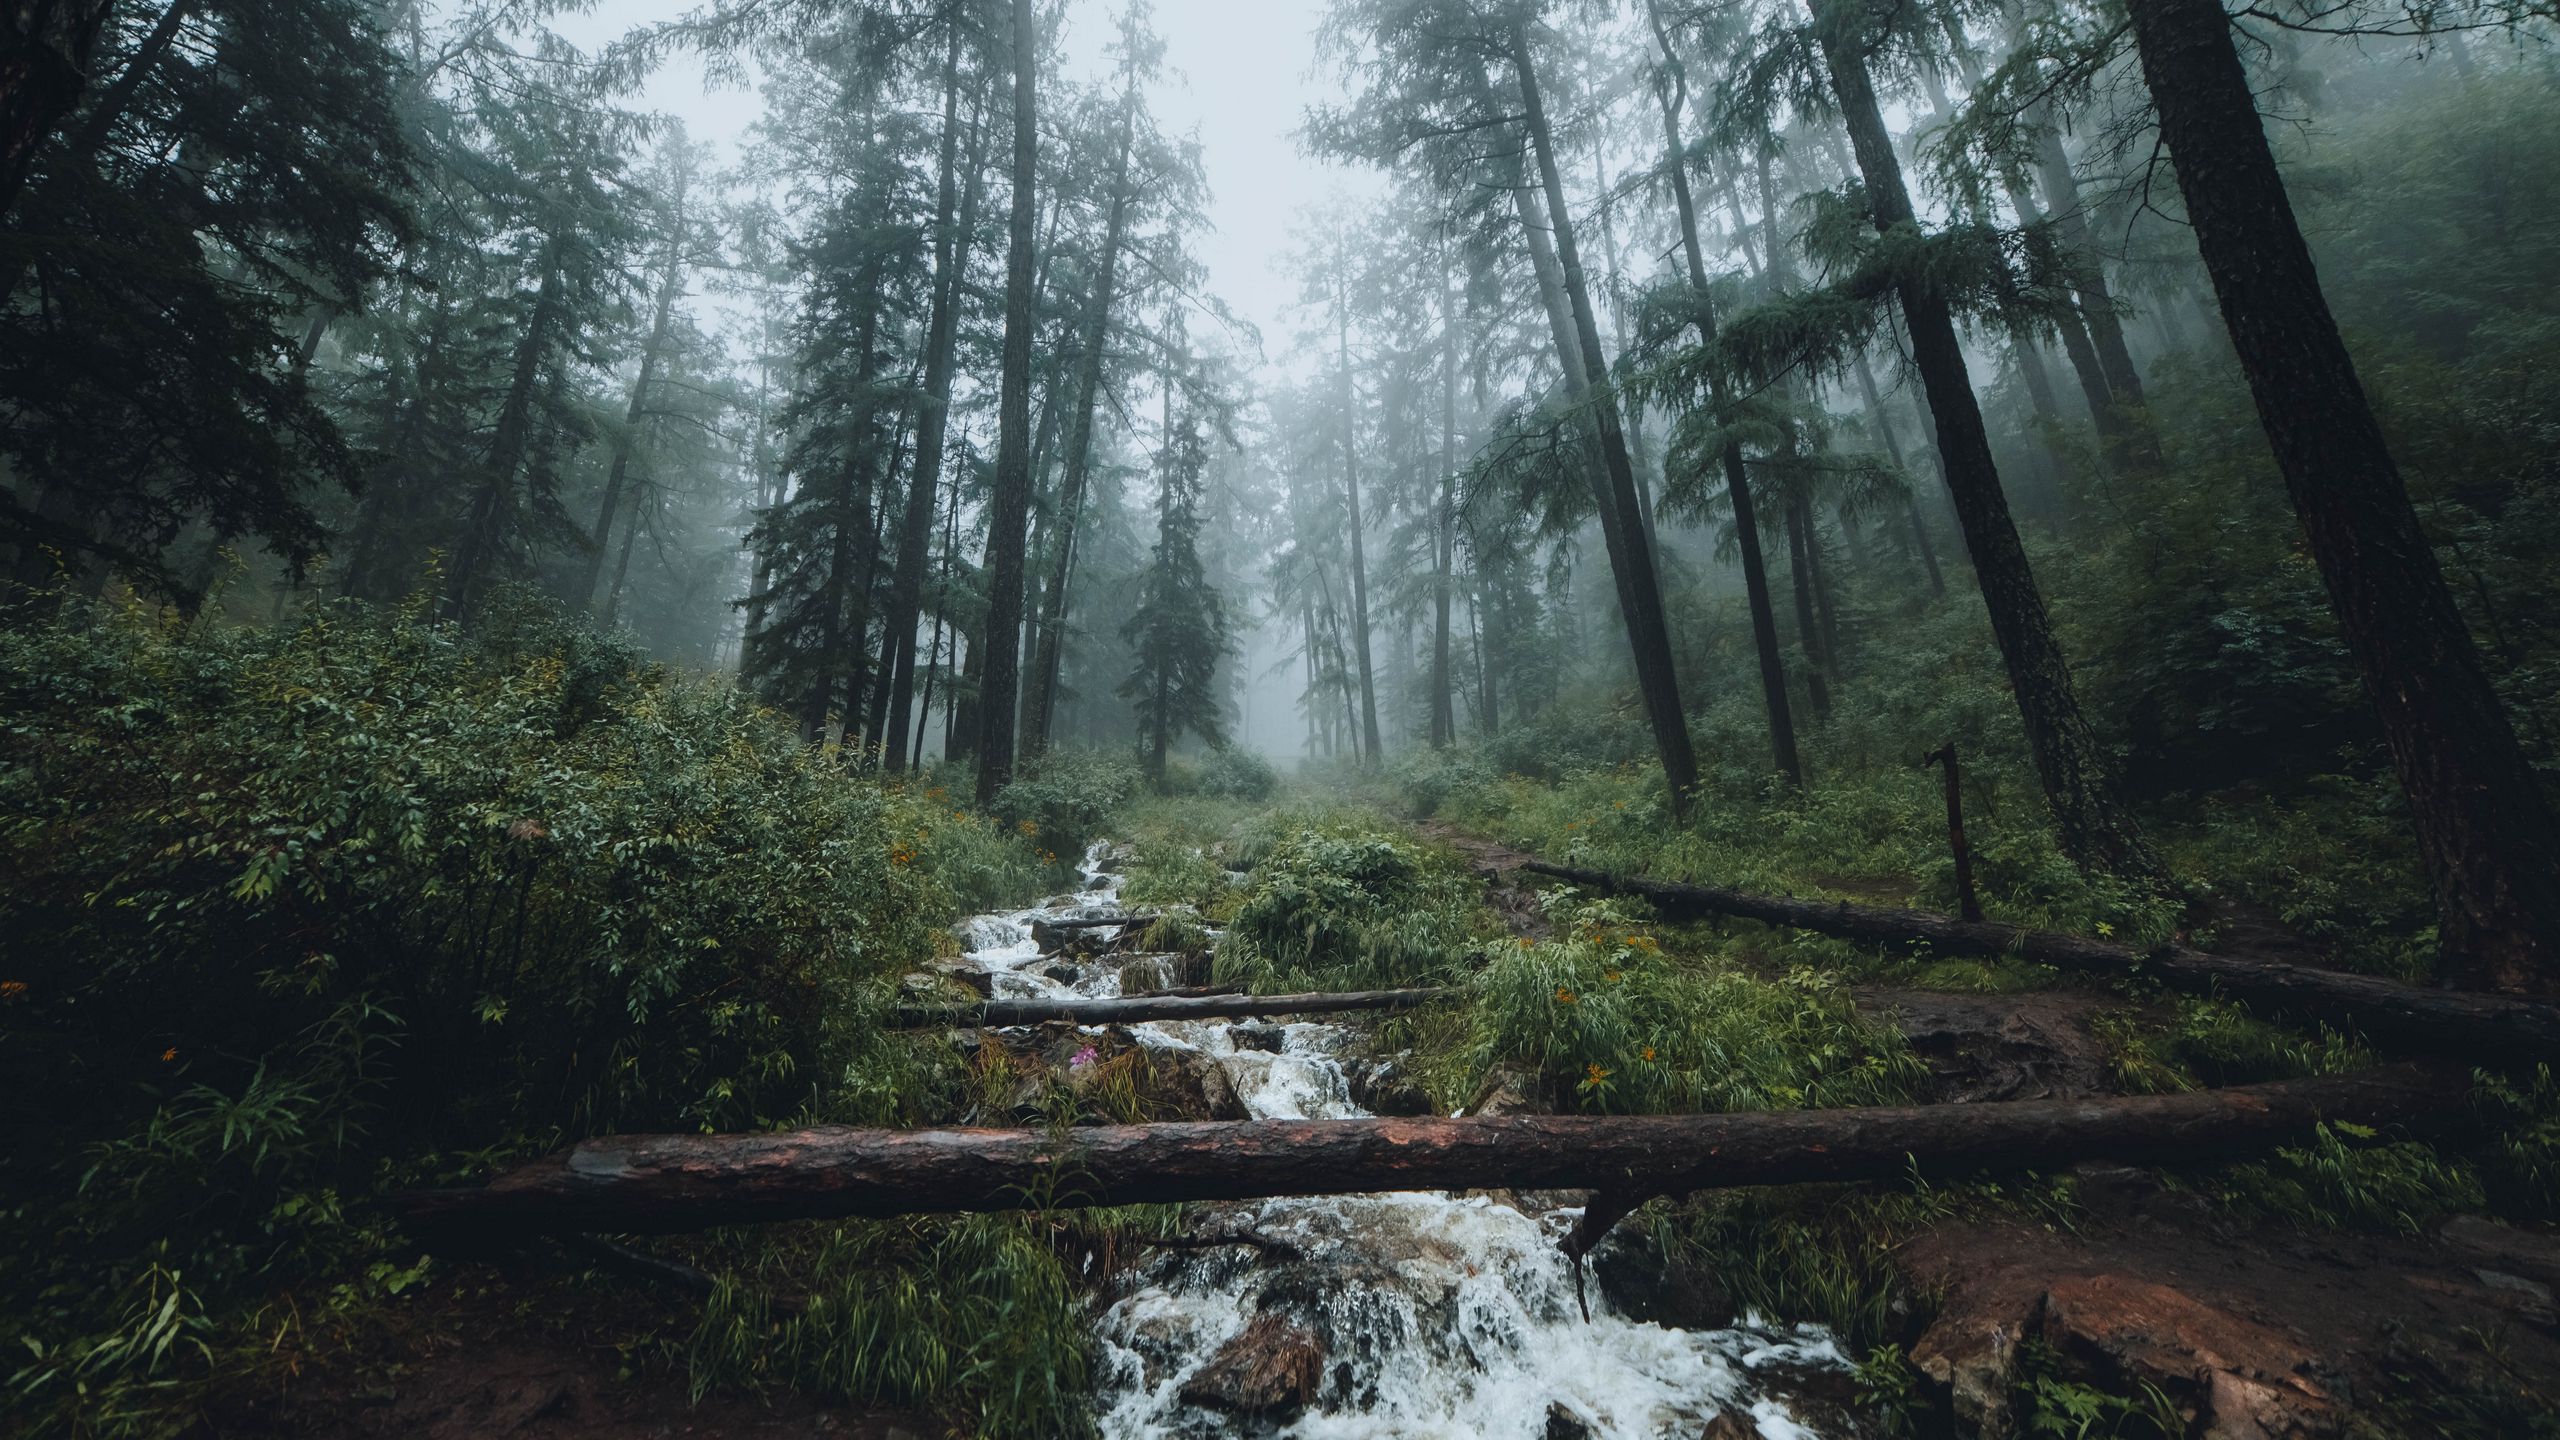 Download wallpaper 2560x1440 forest, stream, fog, trees, landscape widescreen 16:9 HD background